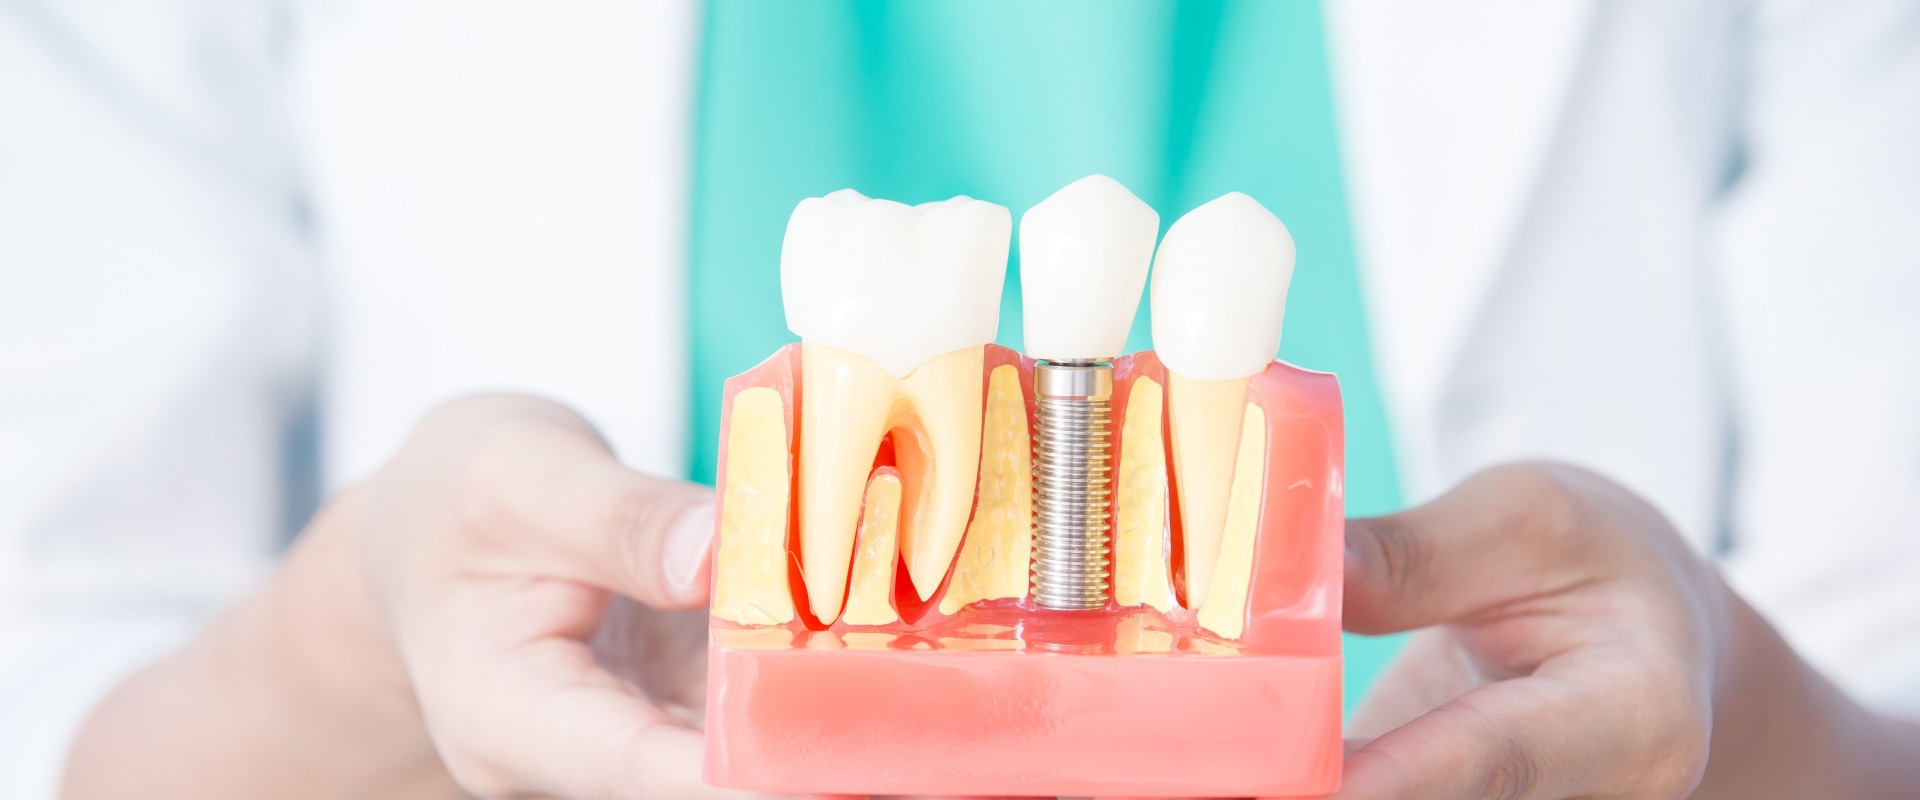 Everything You Need to Know About Dental Implants